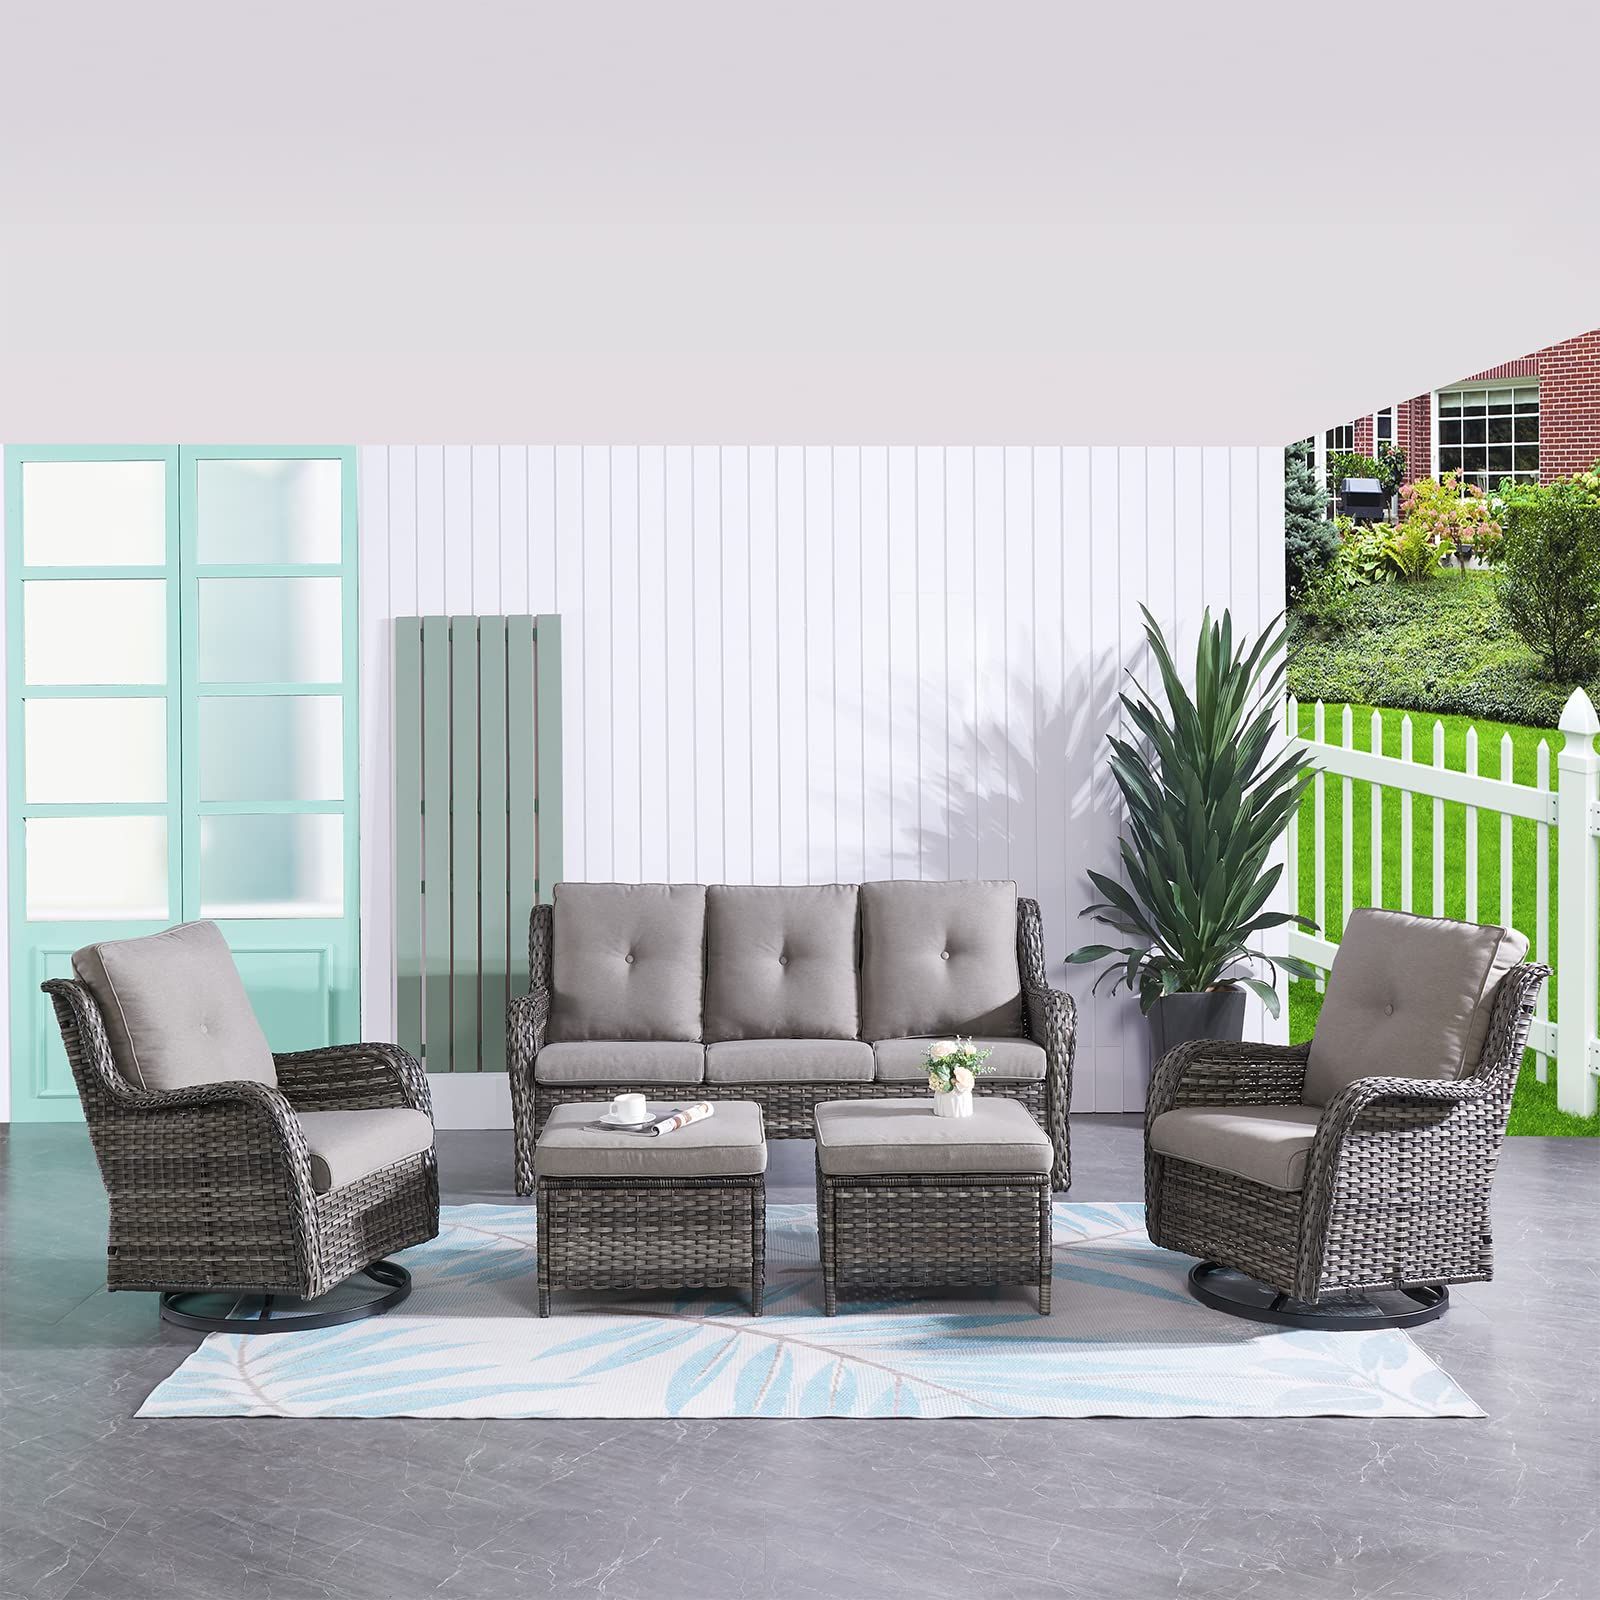 Most Recent Ottomans Patio Furniture Set In Amazon: Hummuh 5 Pieces Outdoor Furniture Patio Furniture Set Wicker  Outdoor Sectional Sofa With Swivel Rocking Chairs,patio Ottomans : Patio,  Lawn & Garden (View 2 of 15)